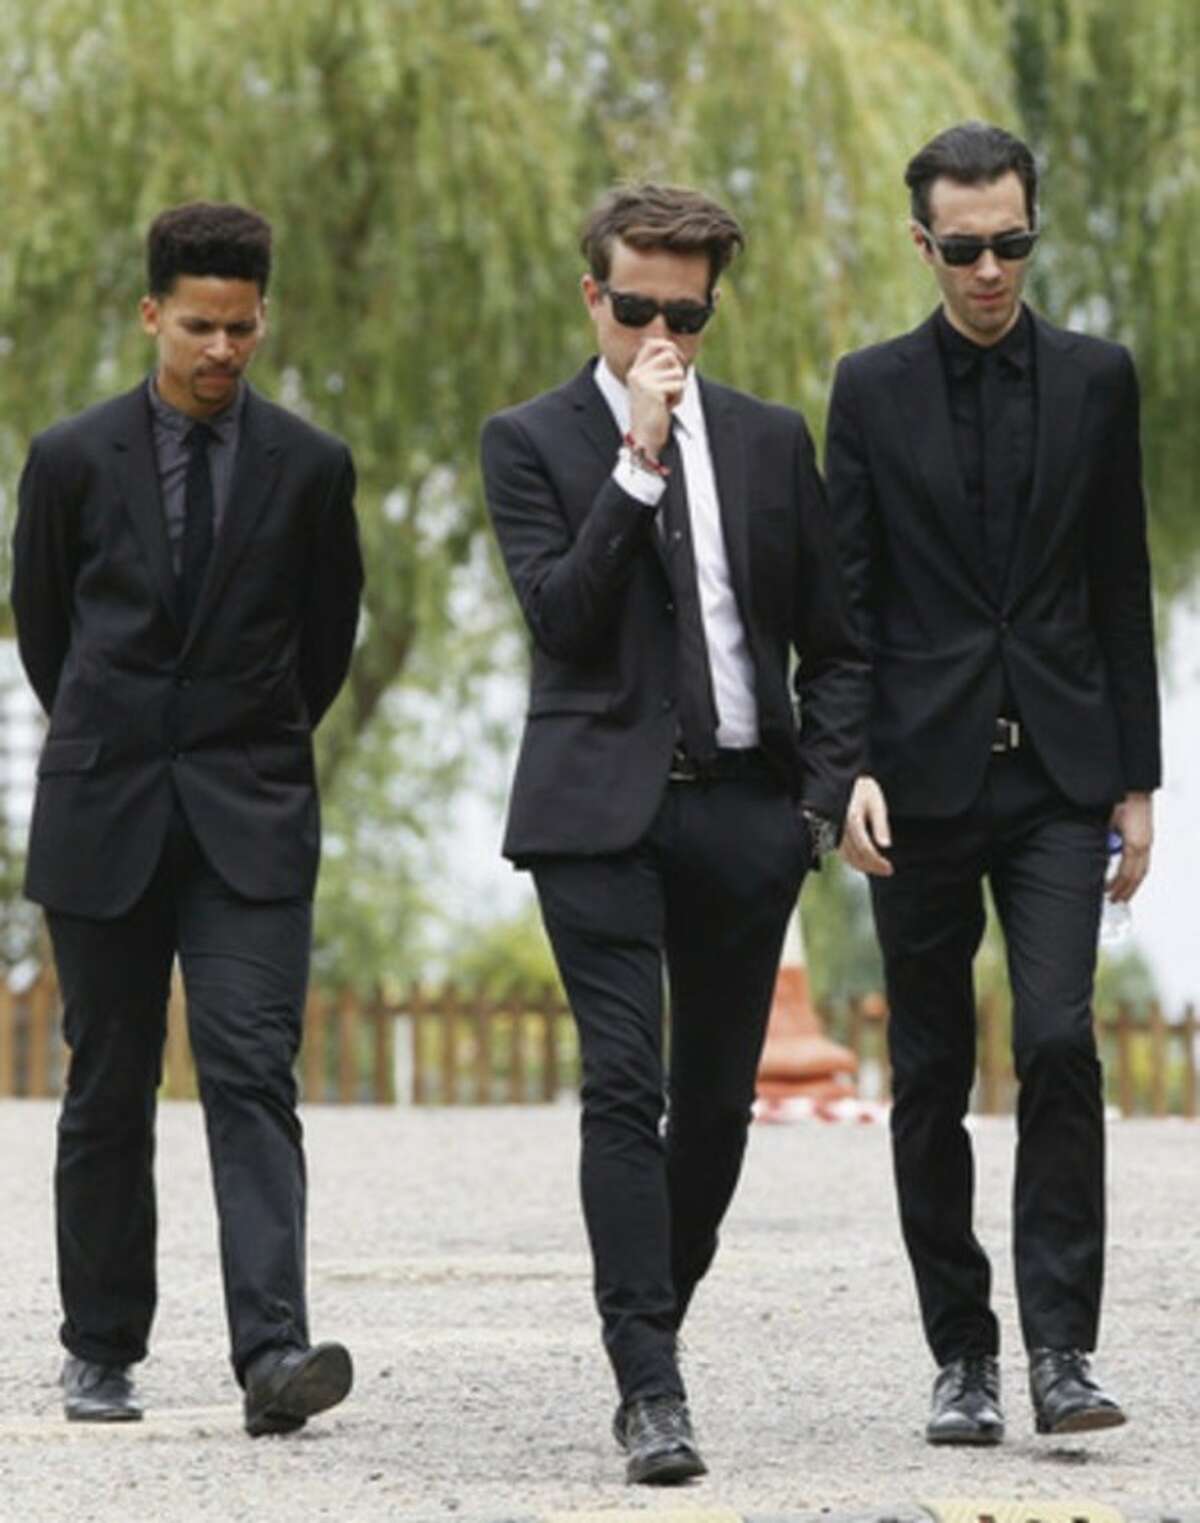 Radio dj Nick Grimshaw, centre, and two other mourners leave Edgwarebury Cemetery, in London, Tuesday July 26, 2011, after attending the funeral of singer Amy Winehouse. The soul diva, who had battled alcohol and drug addiction, was found dead Saturday at her London home. She was 27. (AP Photo/Kirsty Wigglesworth)